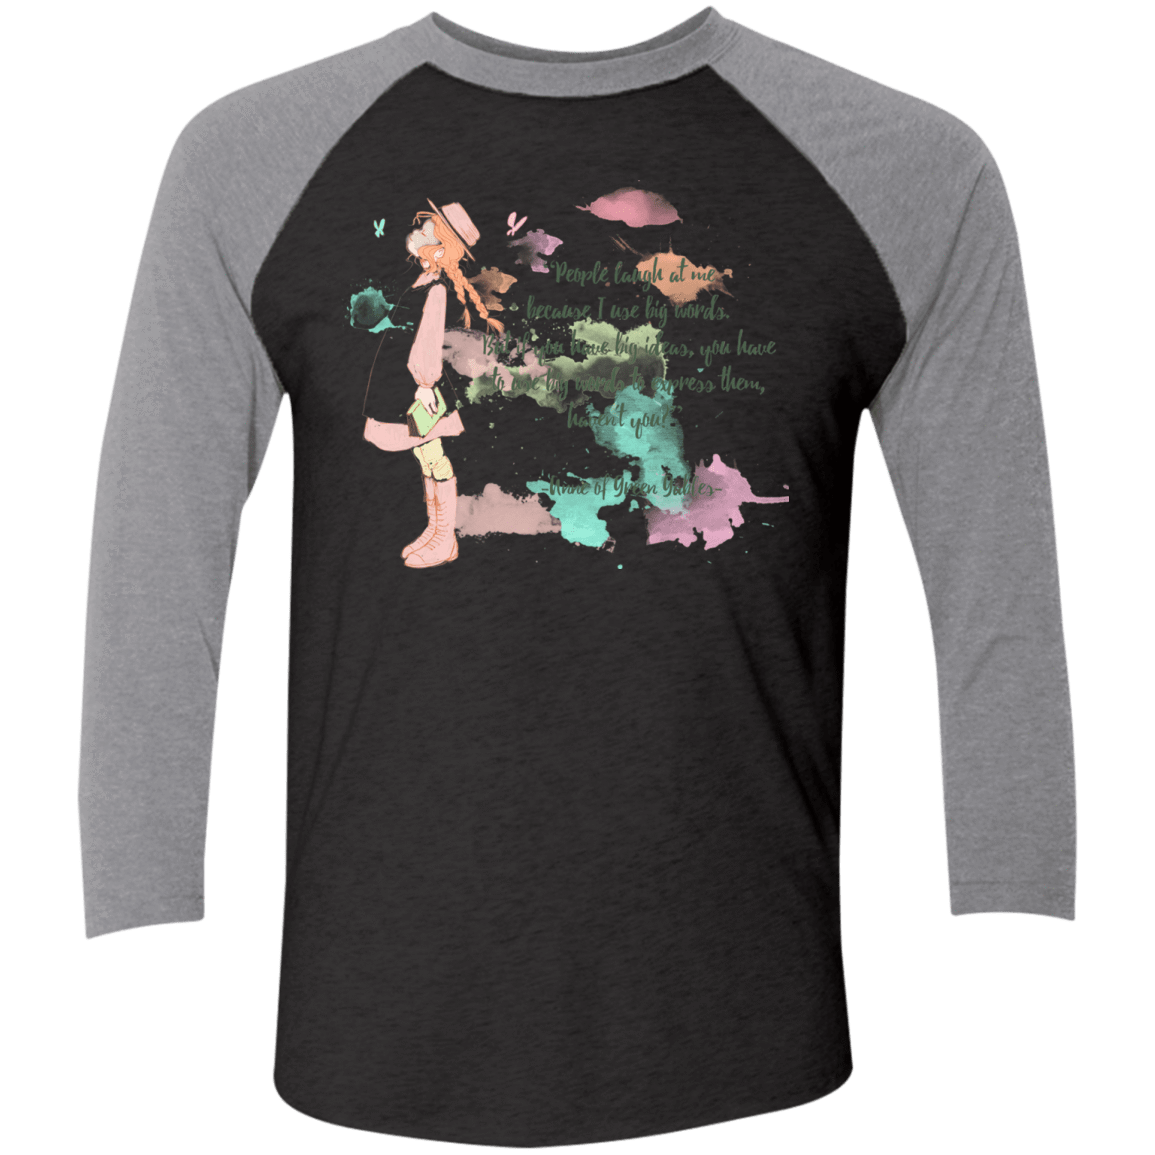 T-Shirts Vintage Black/Premium Heather / X-Small Anne of Green Gables 3 Men's Triblend 3/4 Sleeve